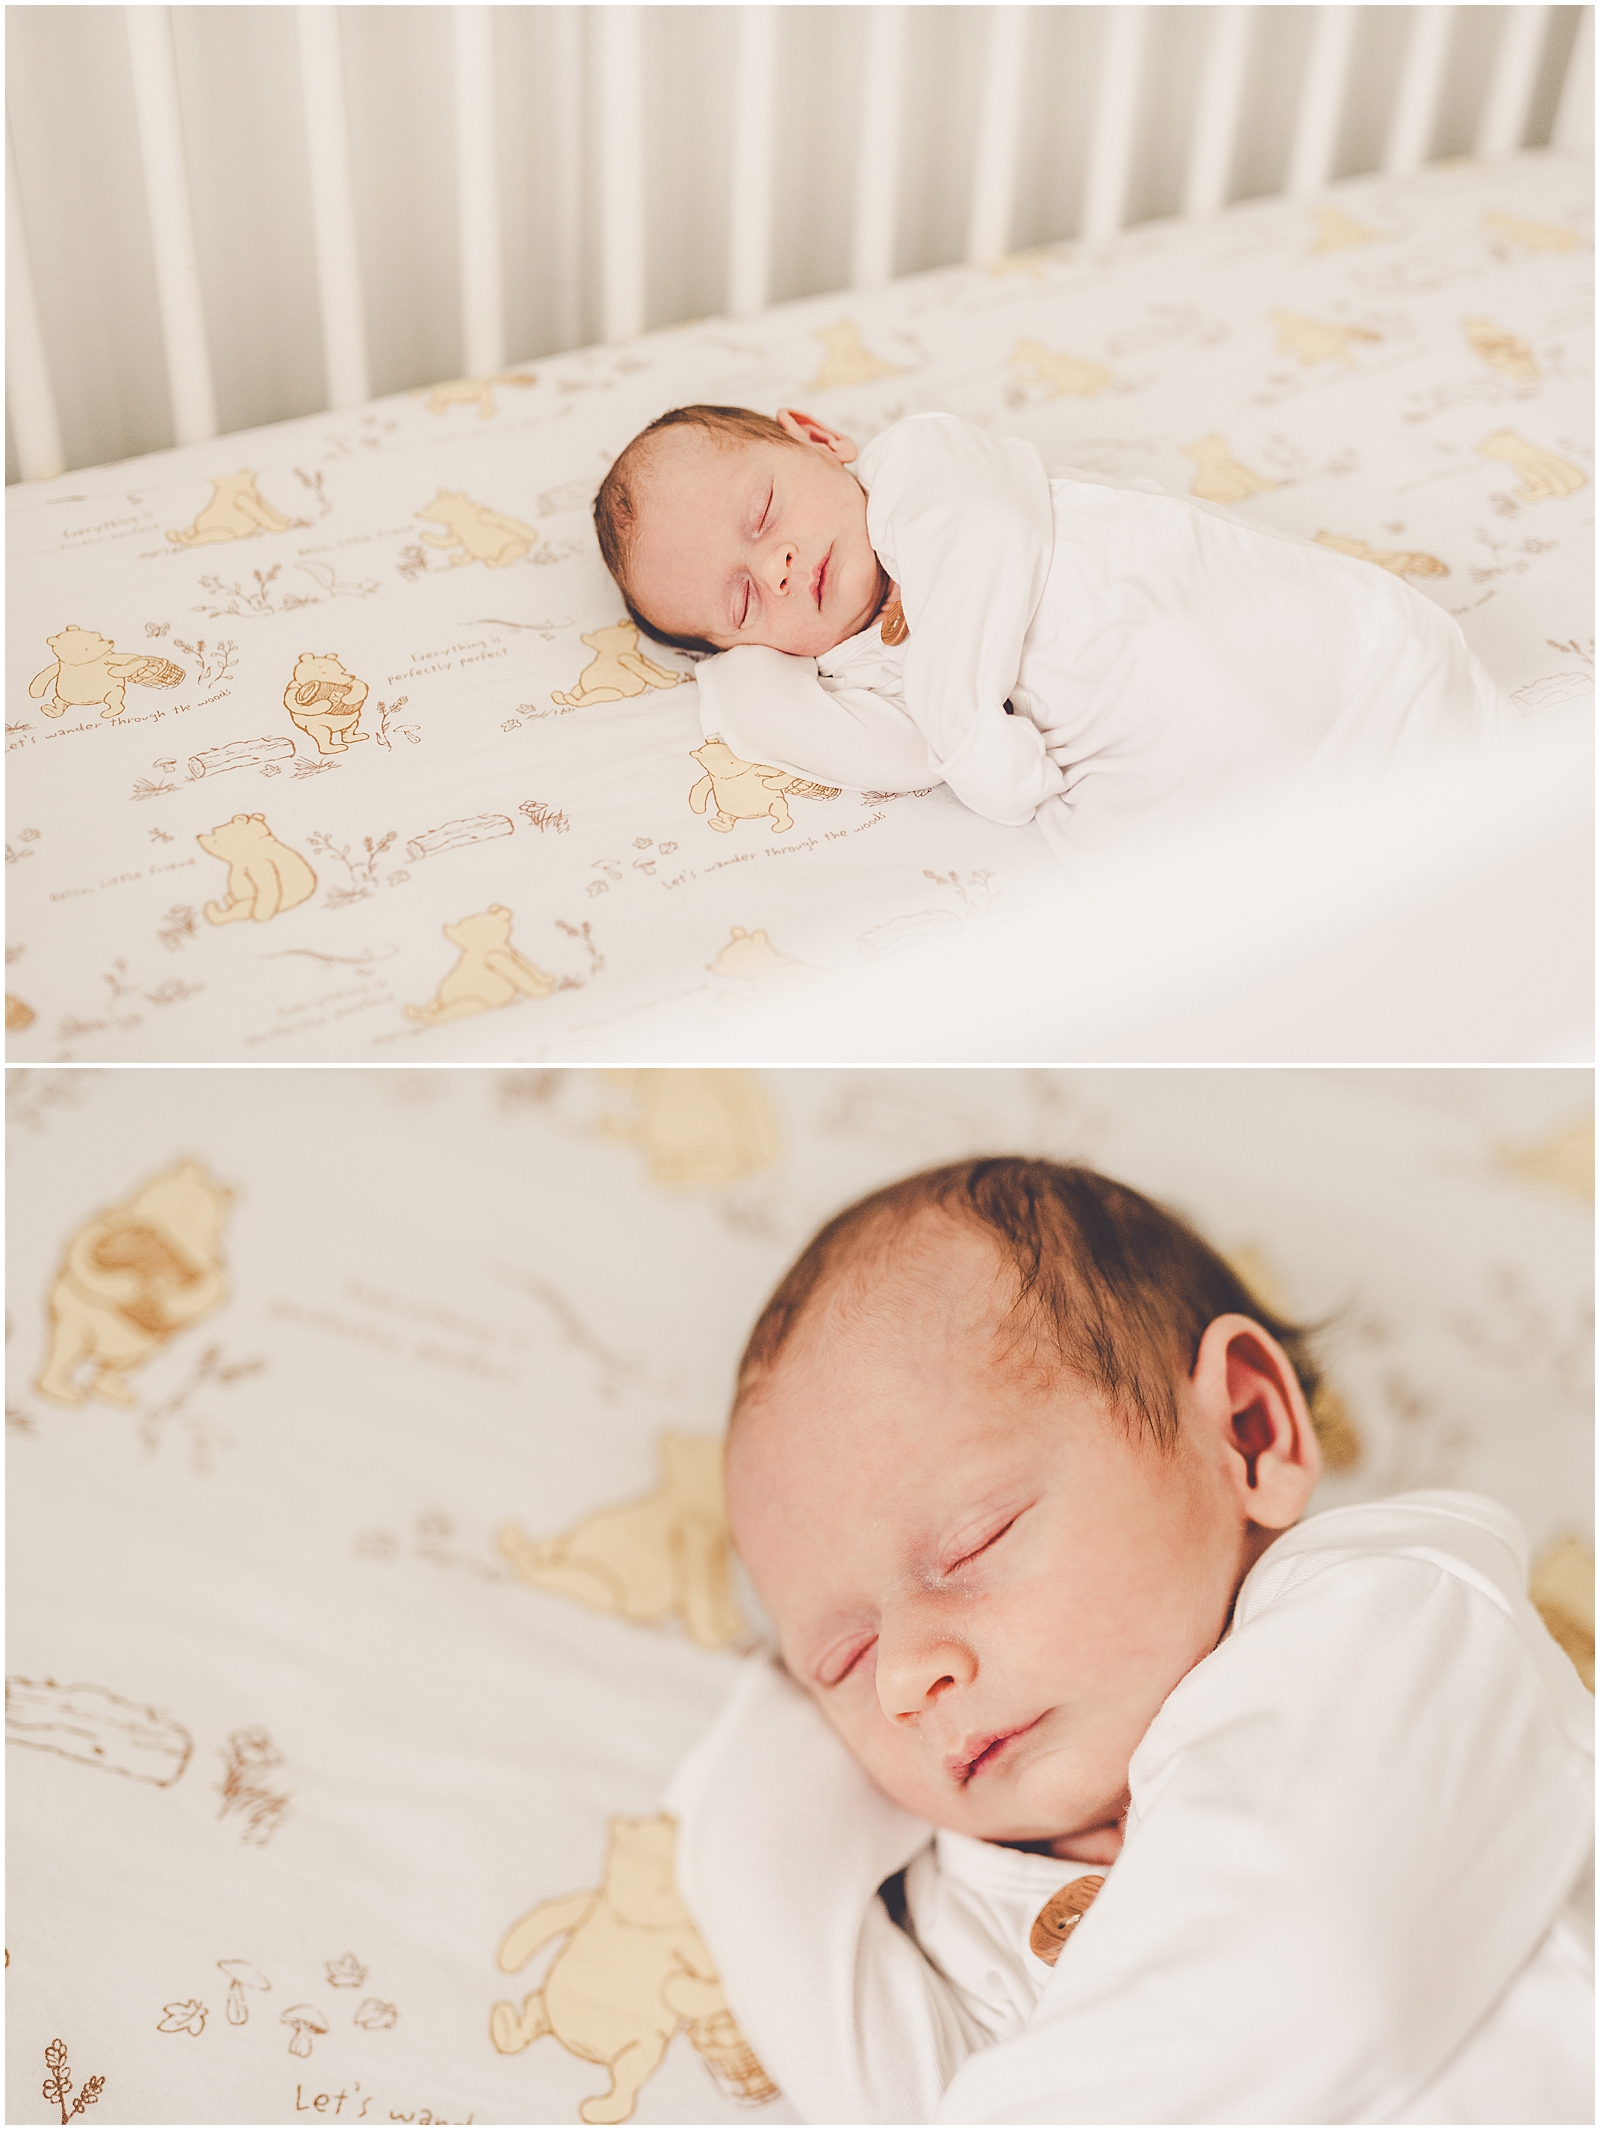 In-home lifestyle newborn photos for the Laurence with Bourbonnais area and Kankakee County family photographer Kara Evans Photographer.